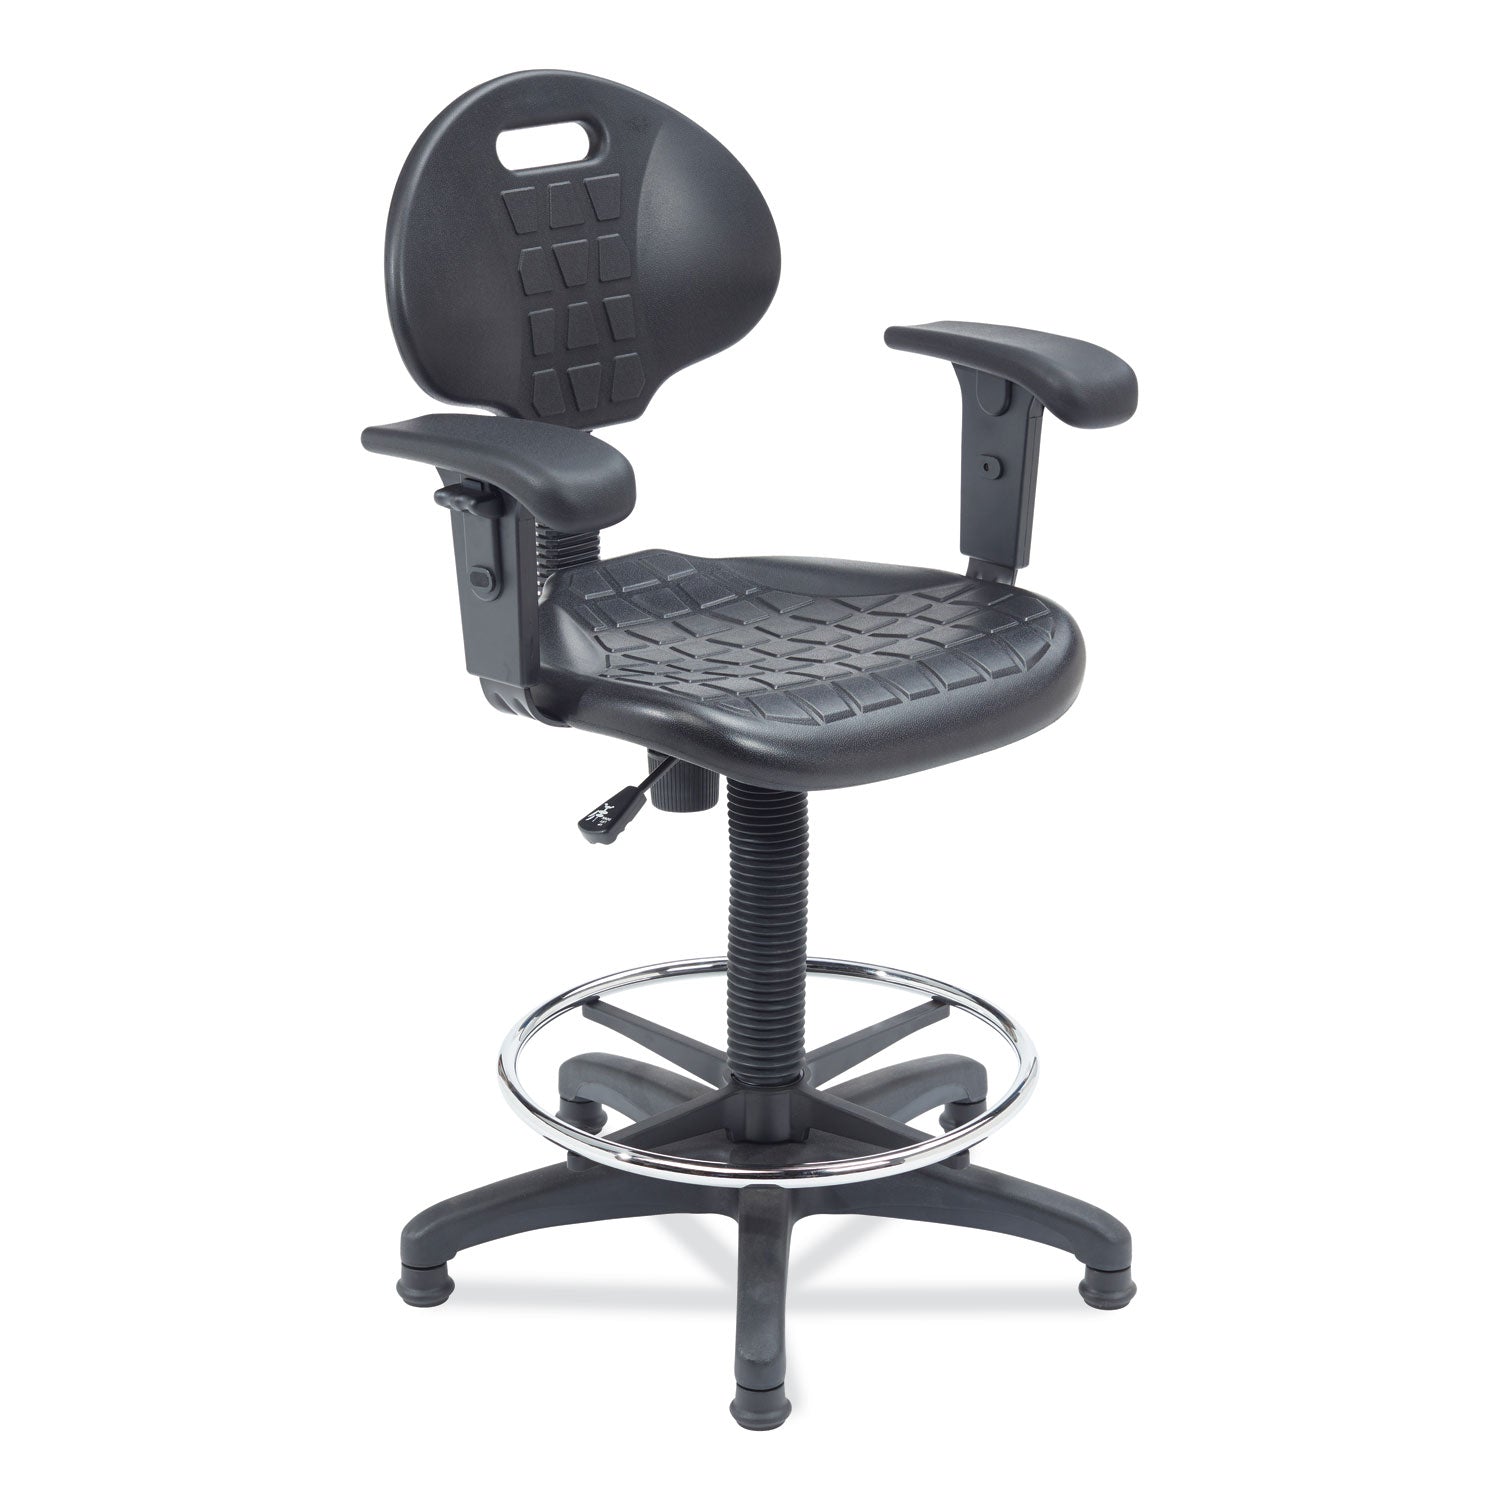 6700-series-polyurethane-adj-height-task-chair-w-arms-supports-300lb-22-32-seat-ht-black-seat-baseships-in-1-3-bus-days_nps6722hba - 1